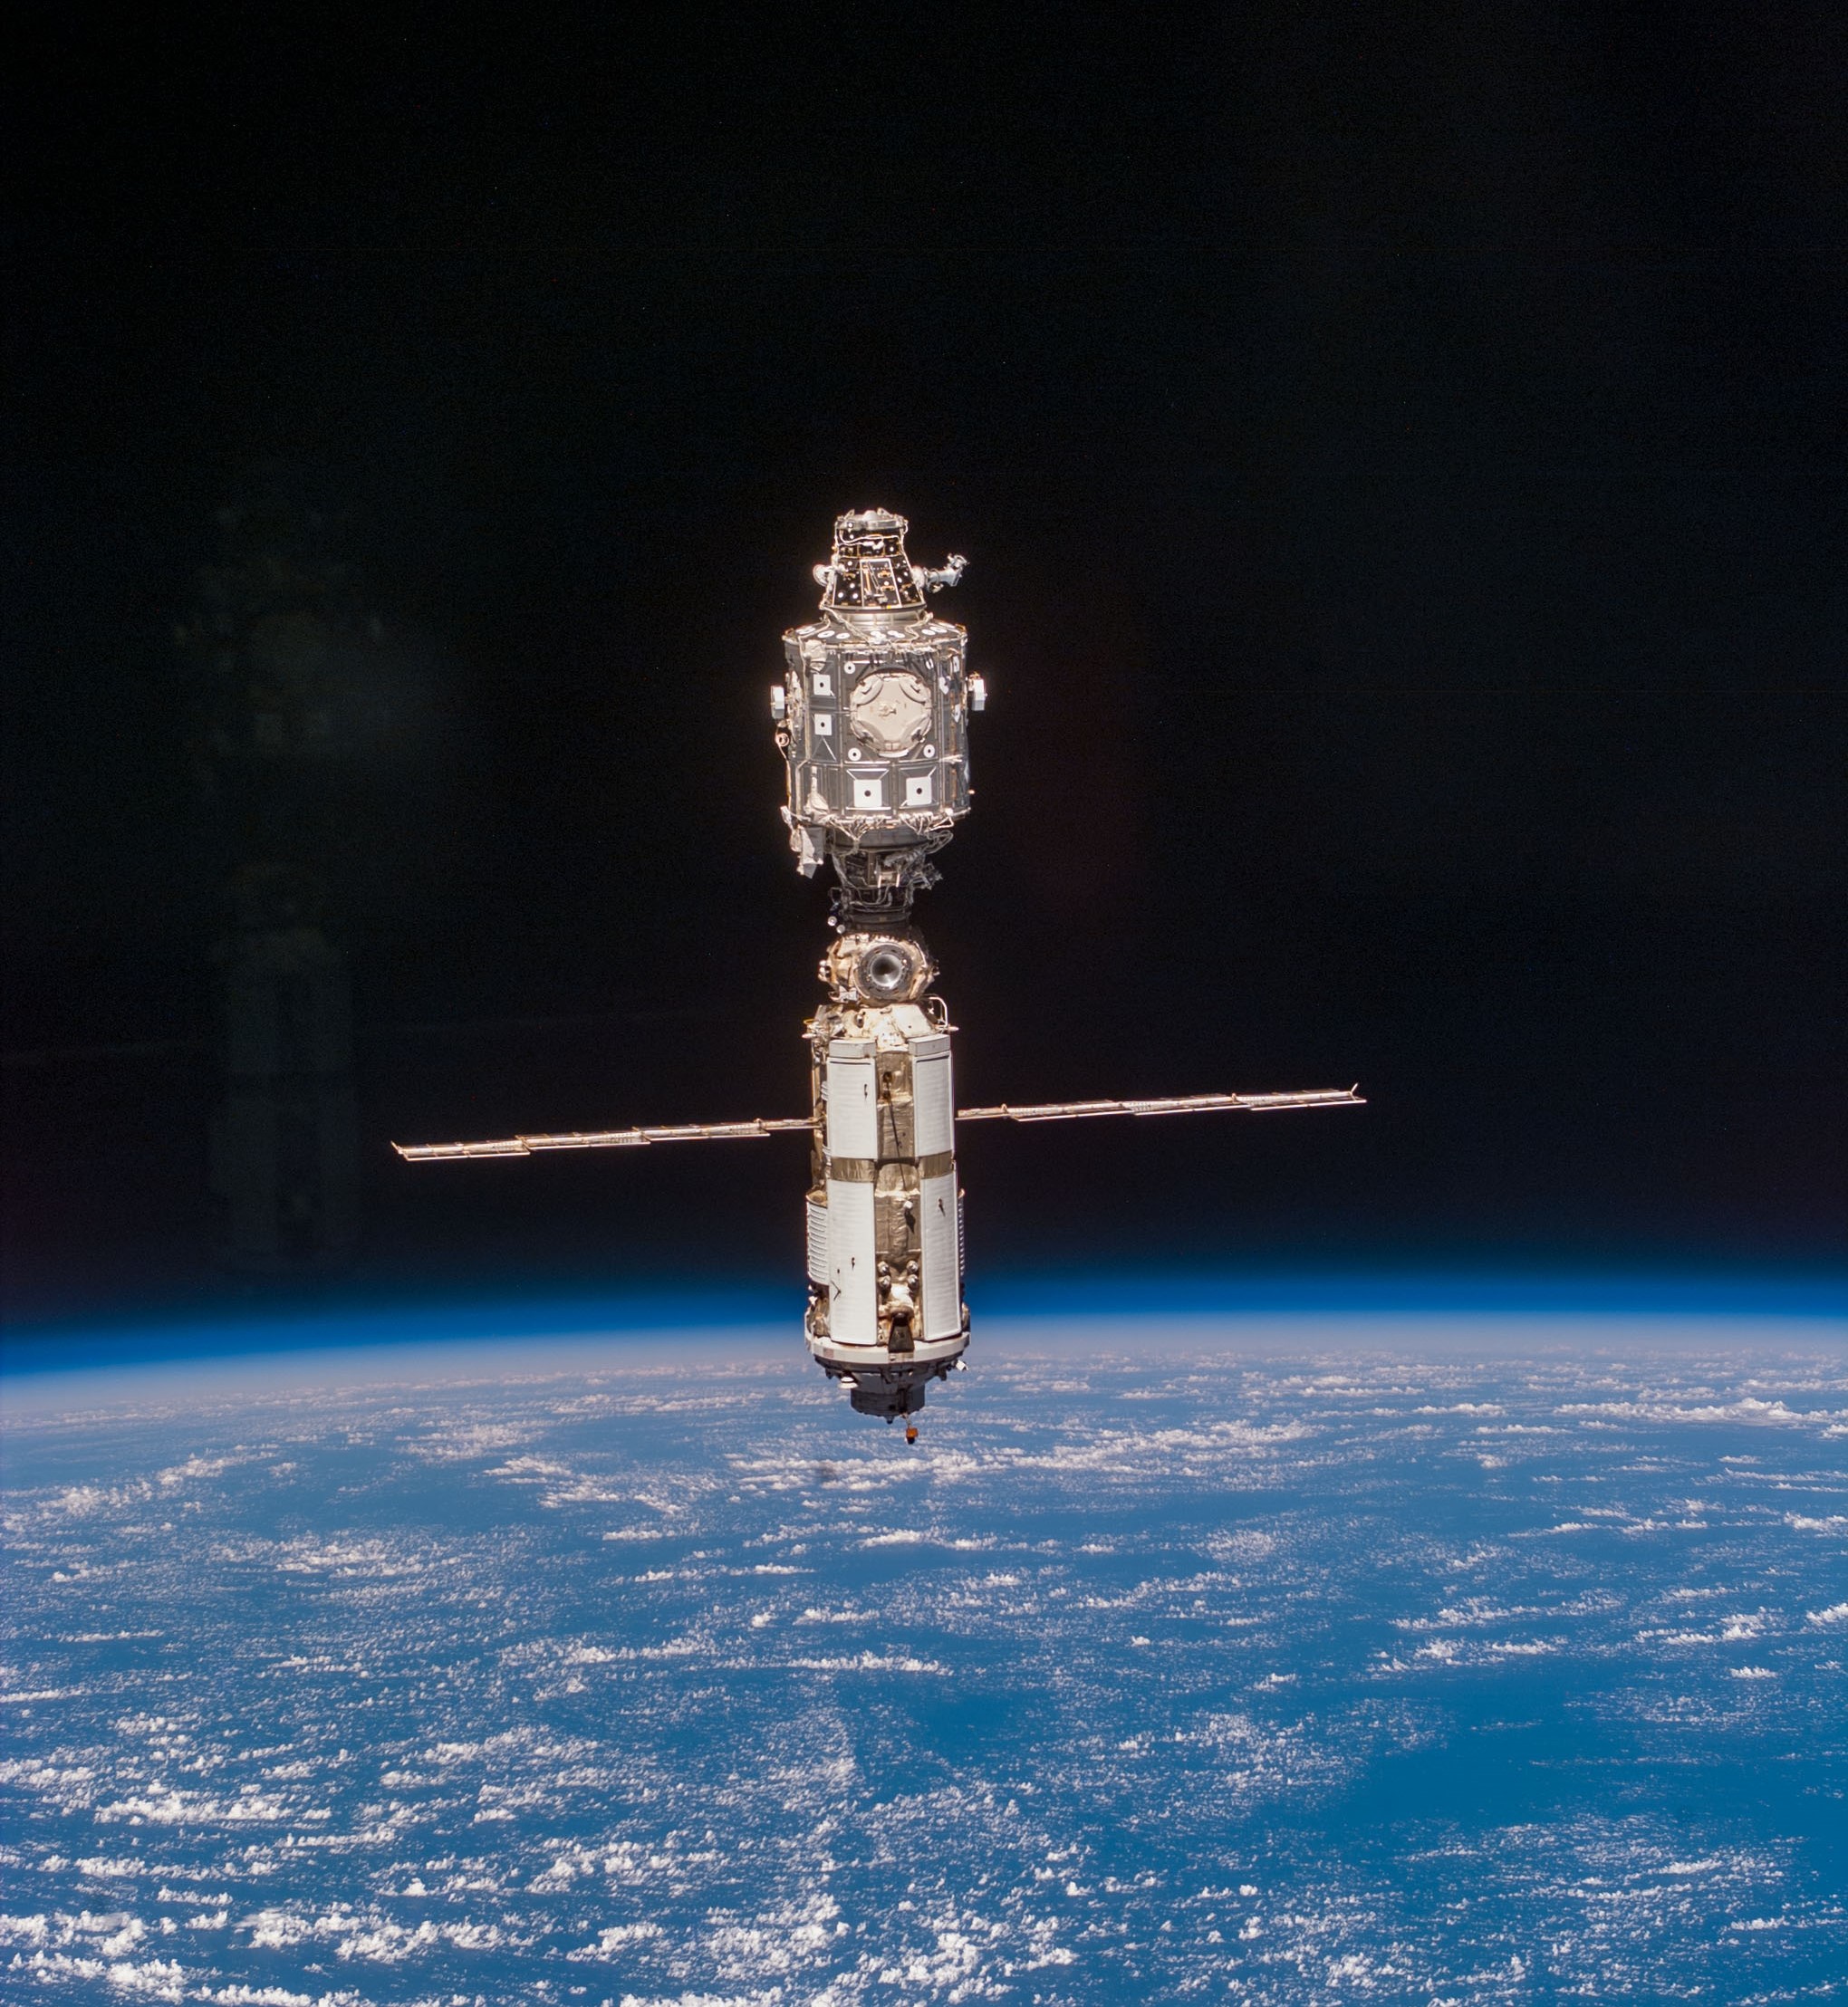 A resupplied and refurbished space station as seen from Discovery during its departure.